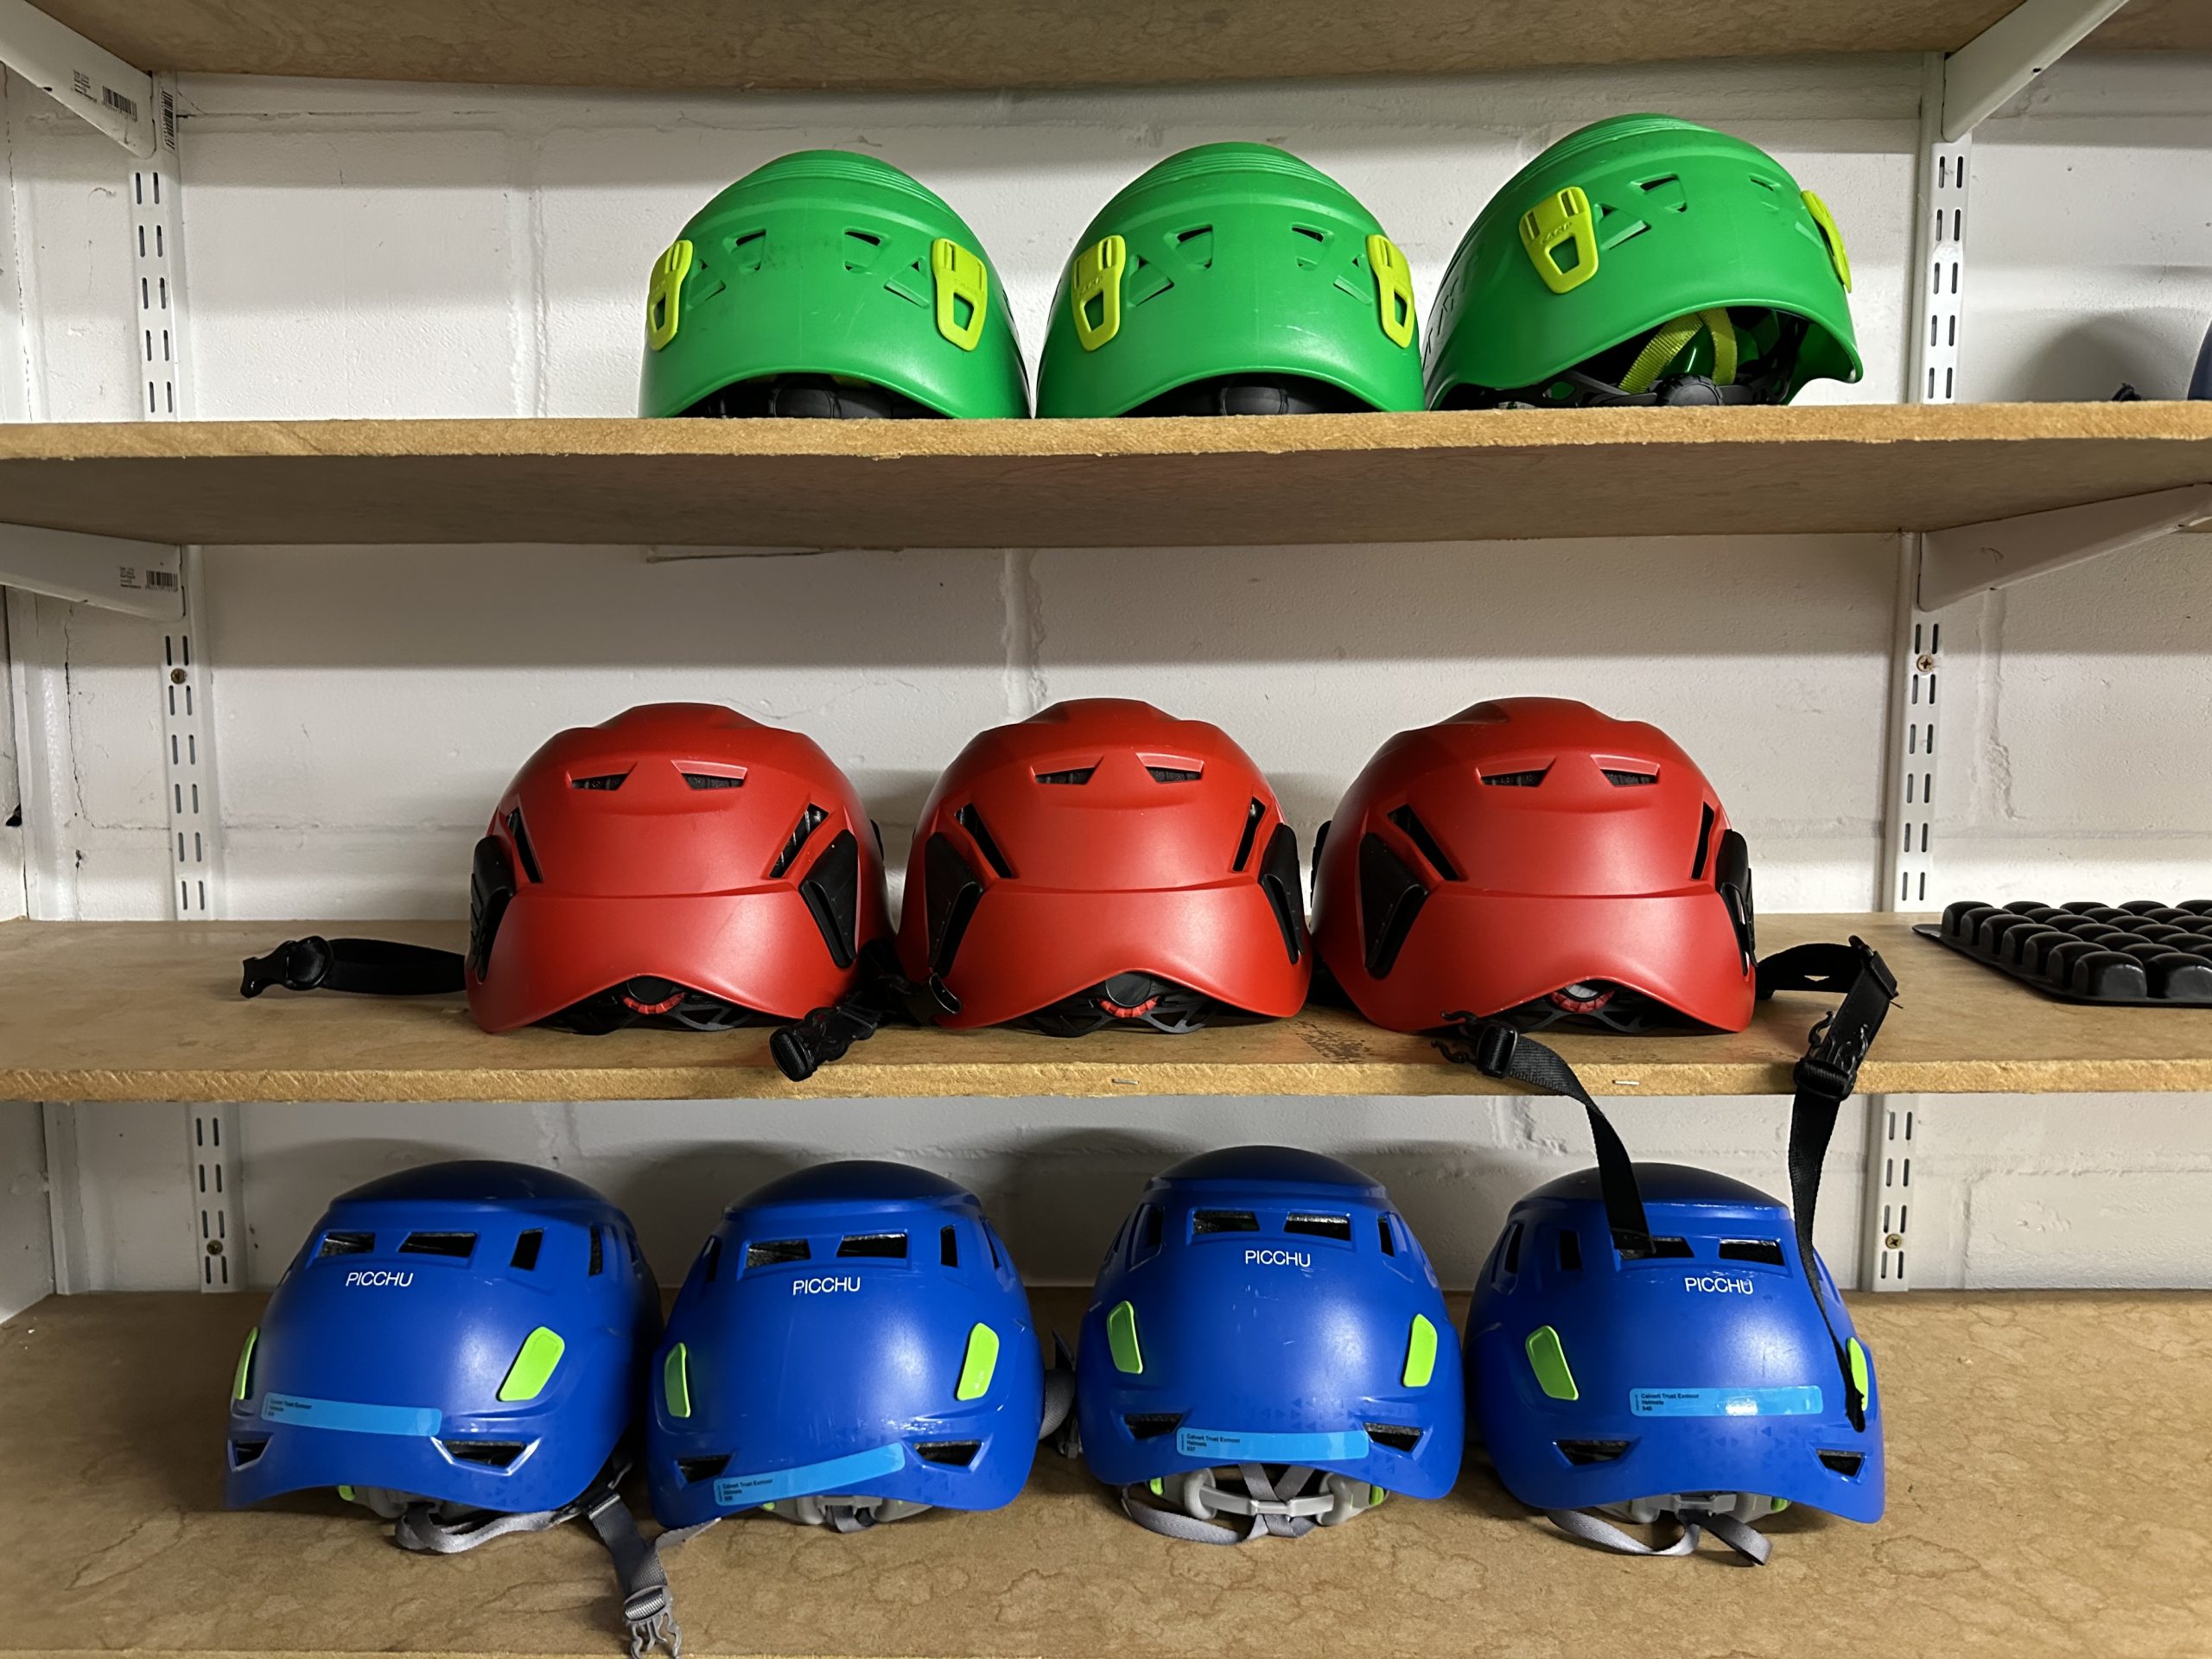 Three shelves with three green helmets on the top shelf, three red helmets on the central shelf and four blue helmets on the bottom shelf.